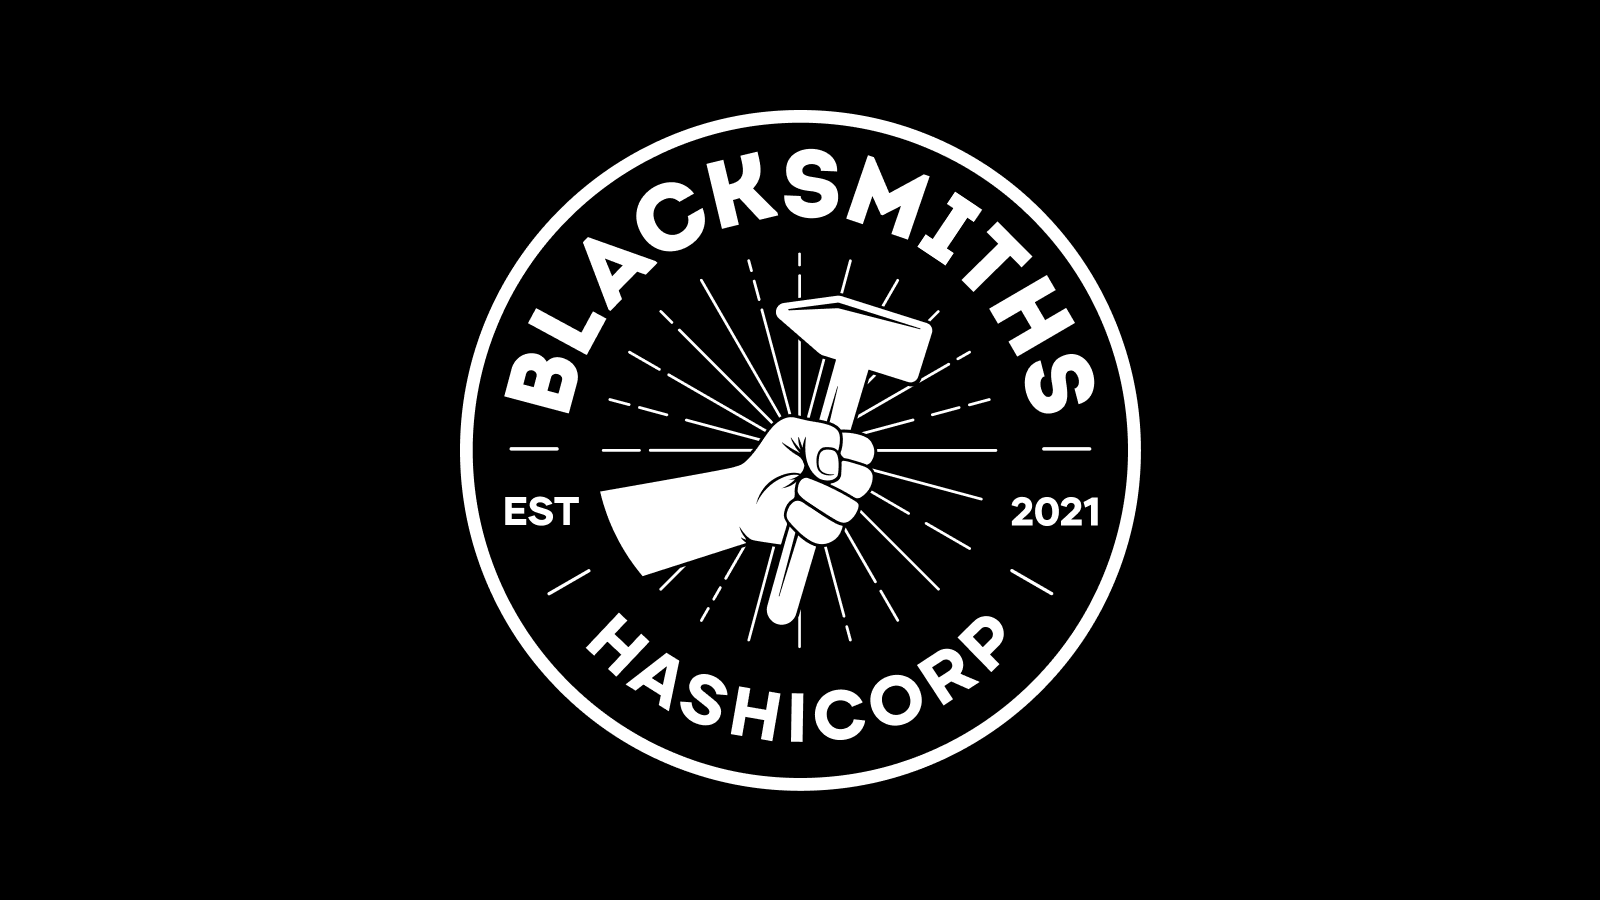 HashiCorp Voices: How the Blacksmiths ERG Supports the Community